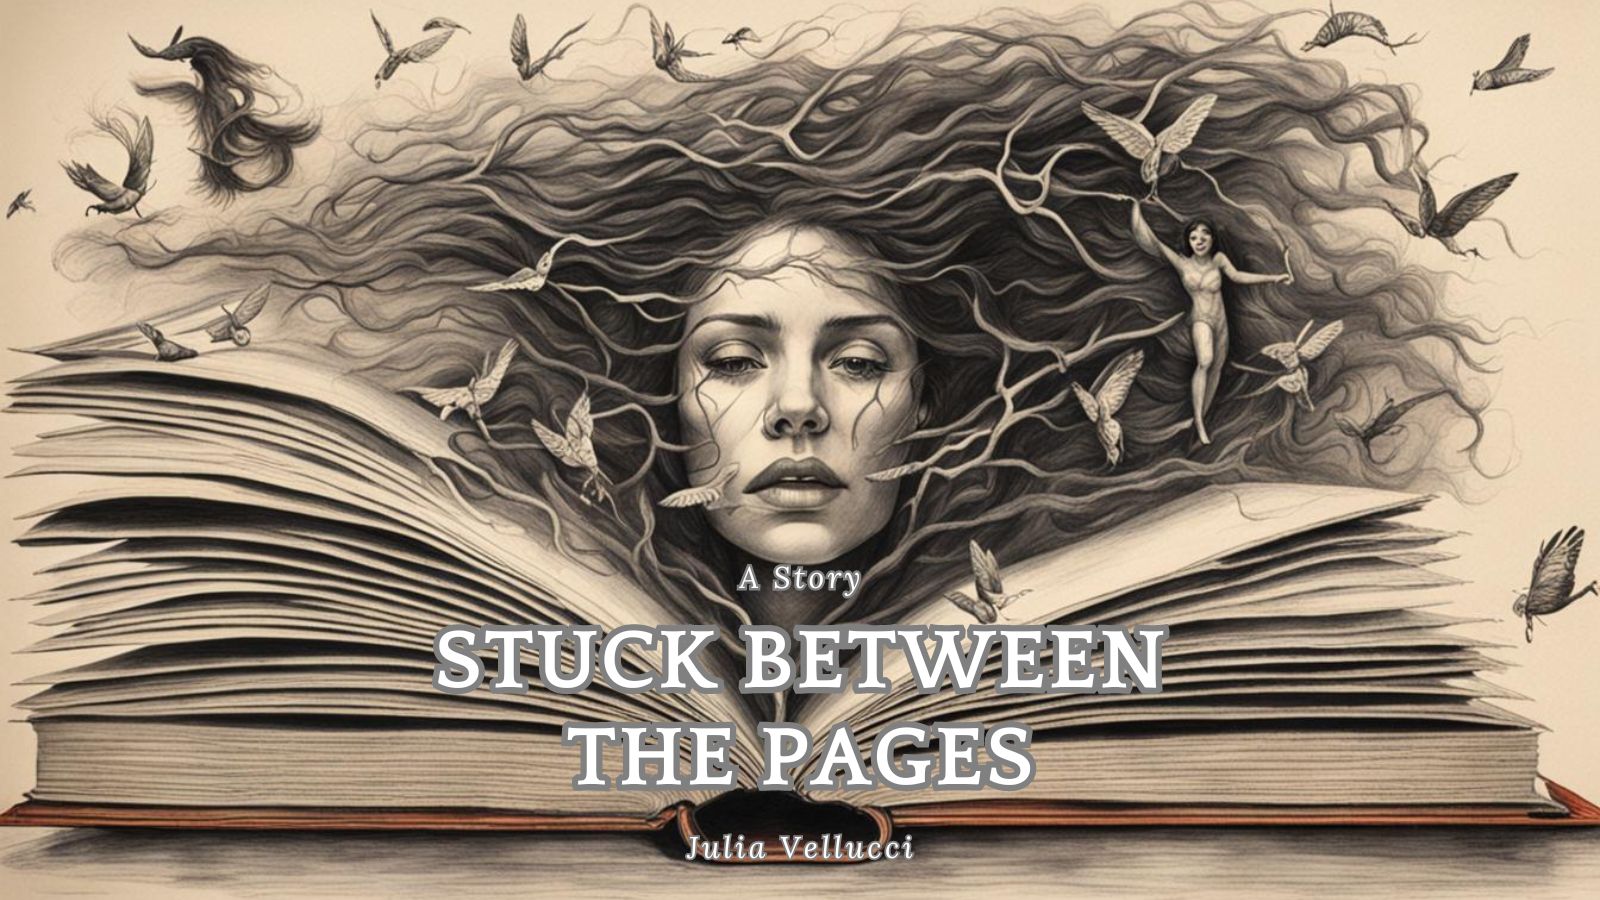 Stuck Between the Pages by Julia Vellucci